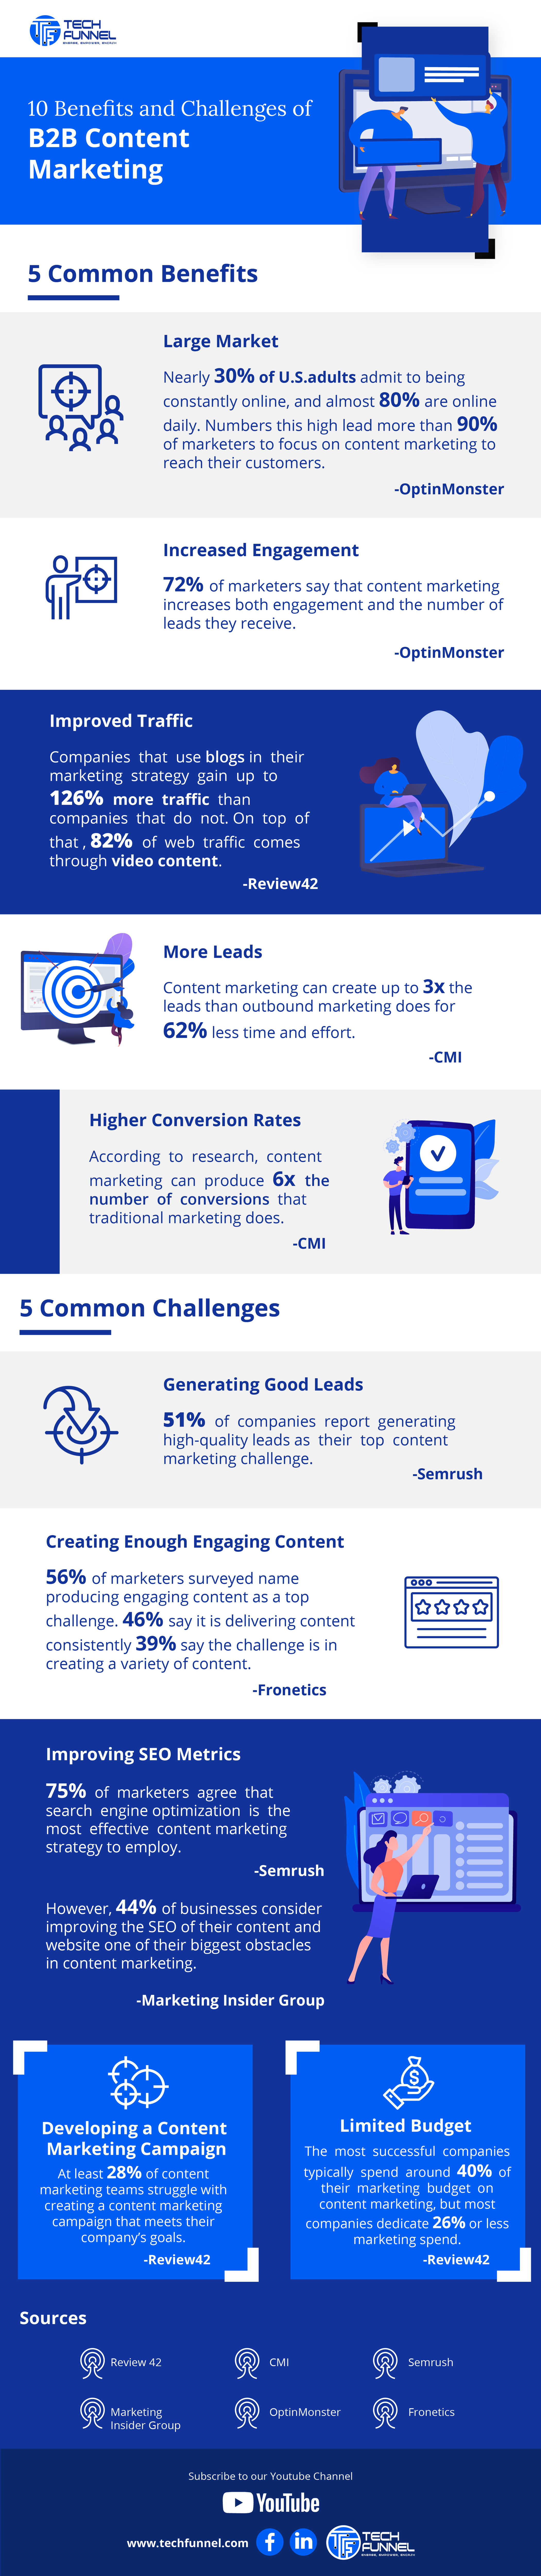 Benefits and challenges of B2B Content Marketing